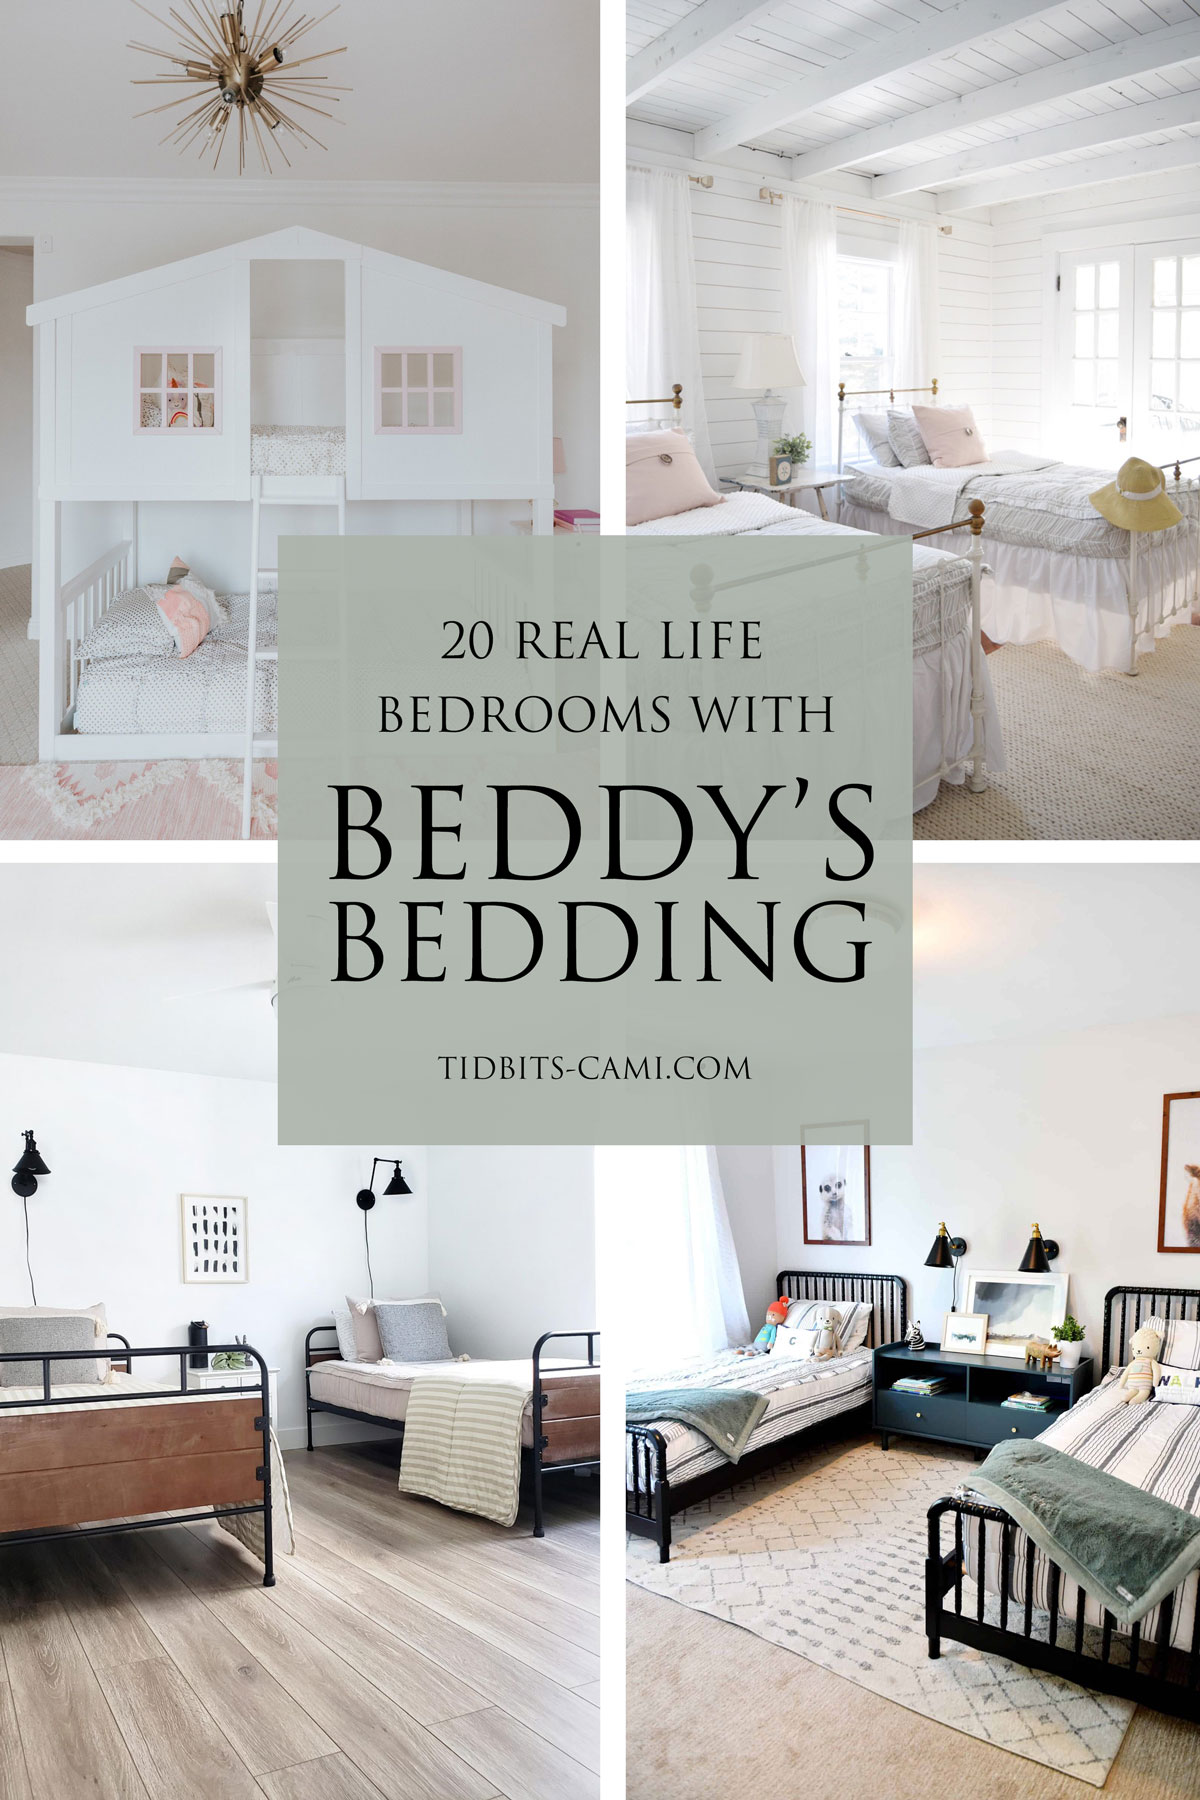 Beddys Bedding in real life bedrooms